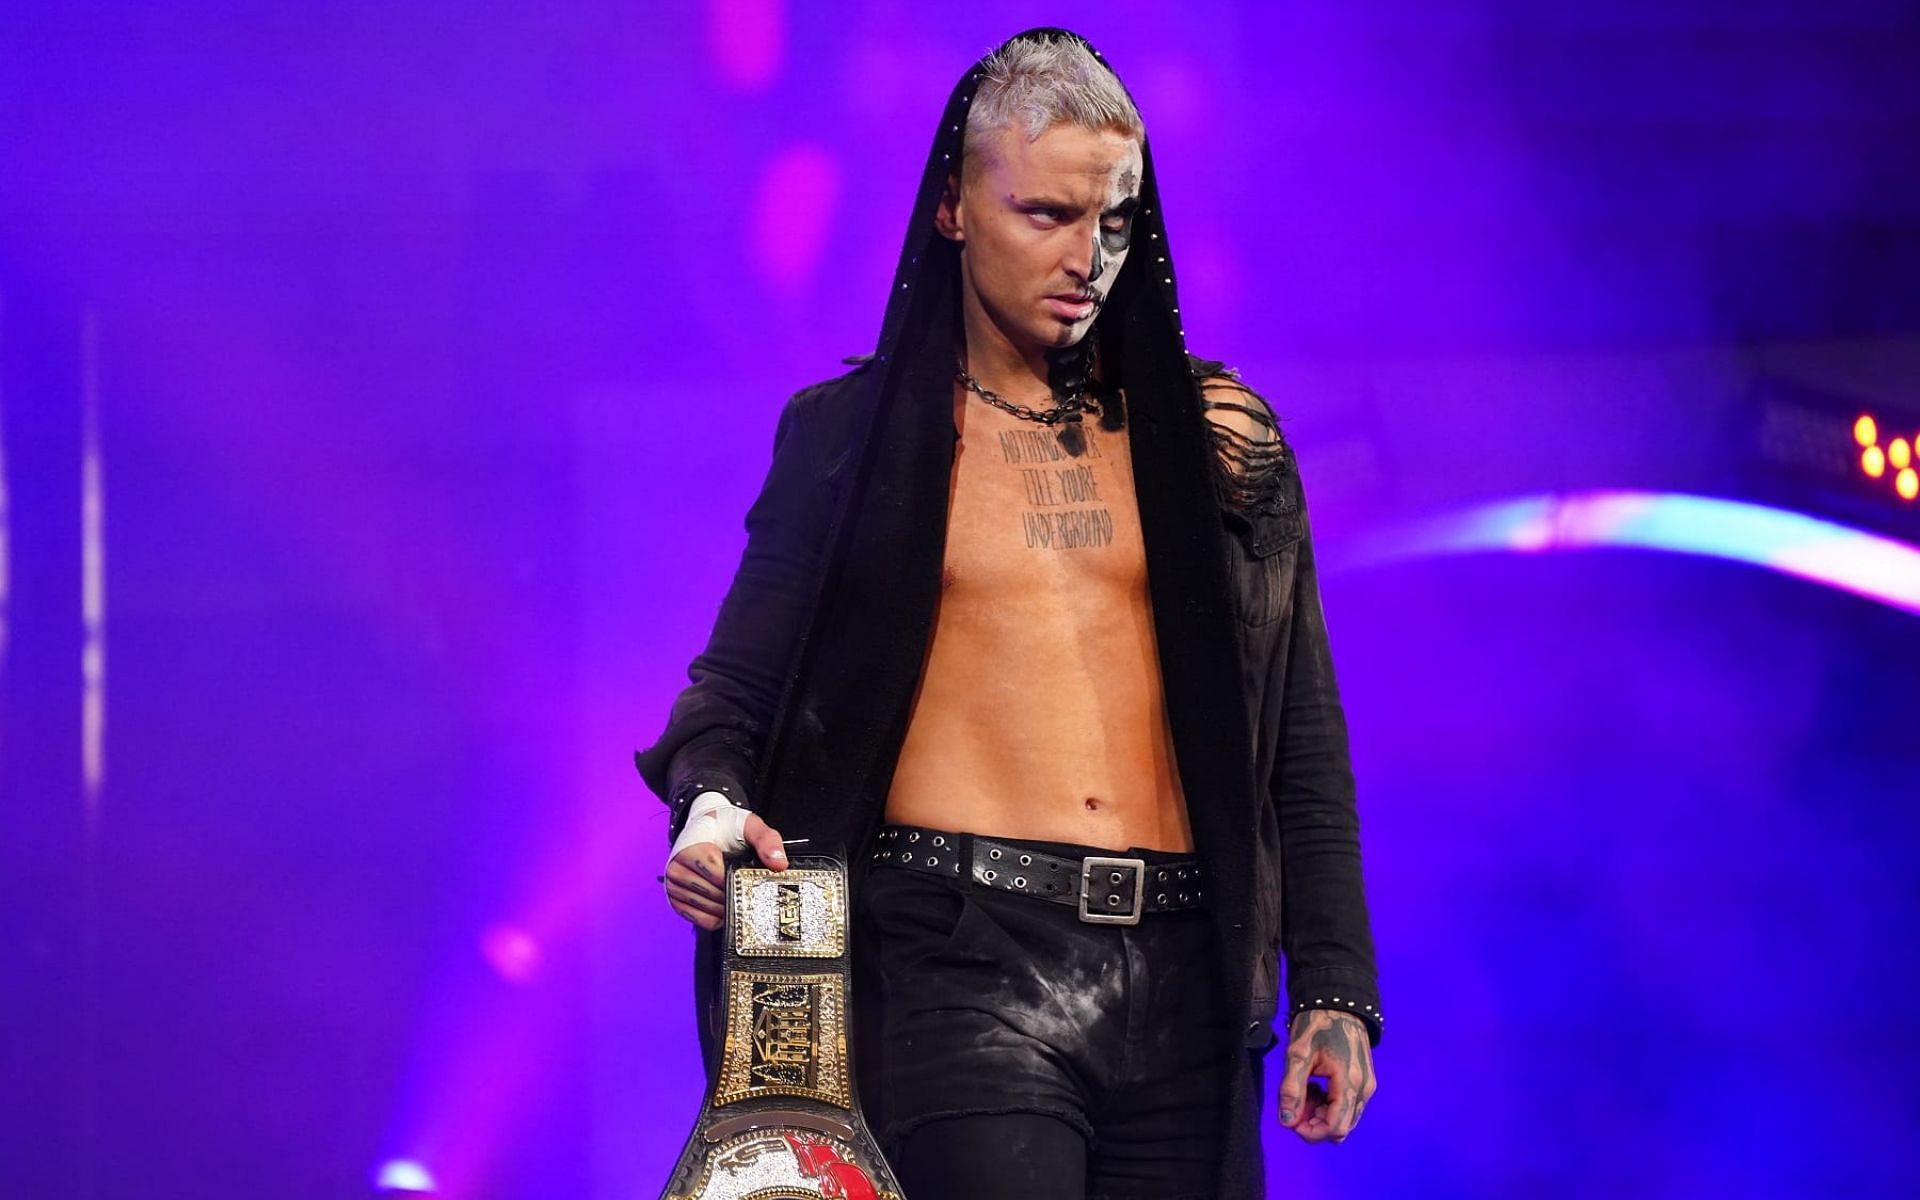 AEW star Darby Allin has been in a heated rivalry with this top faction member.